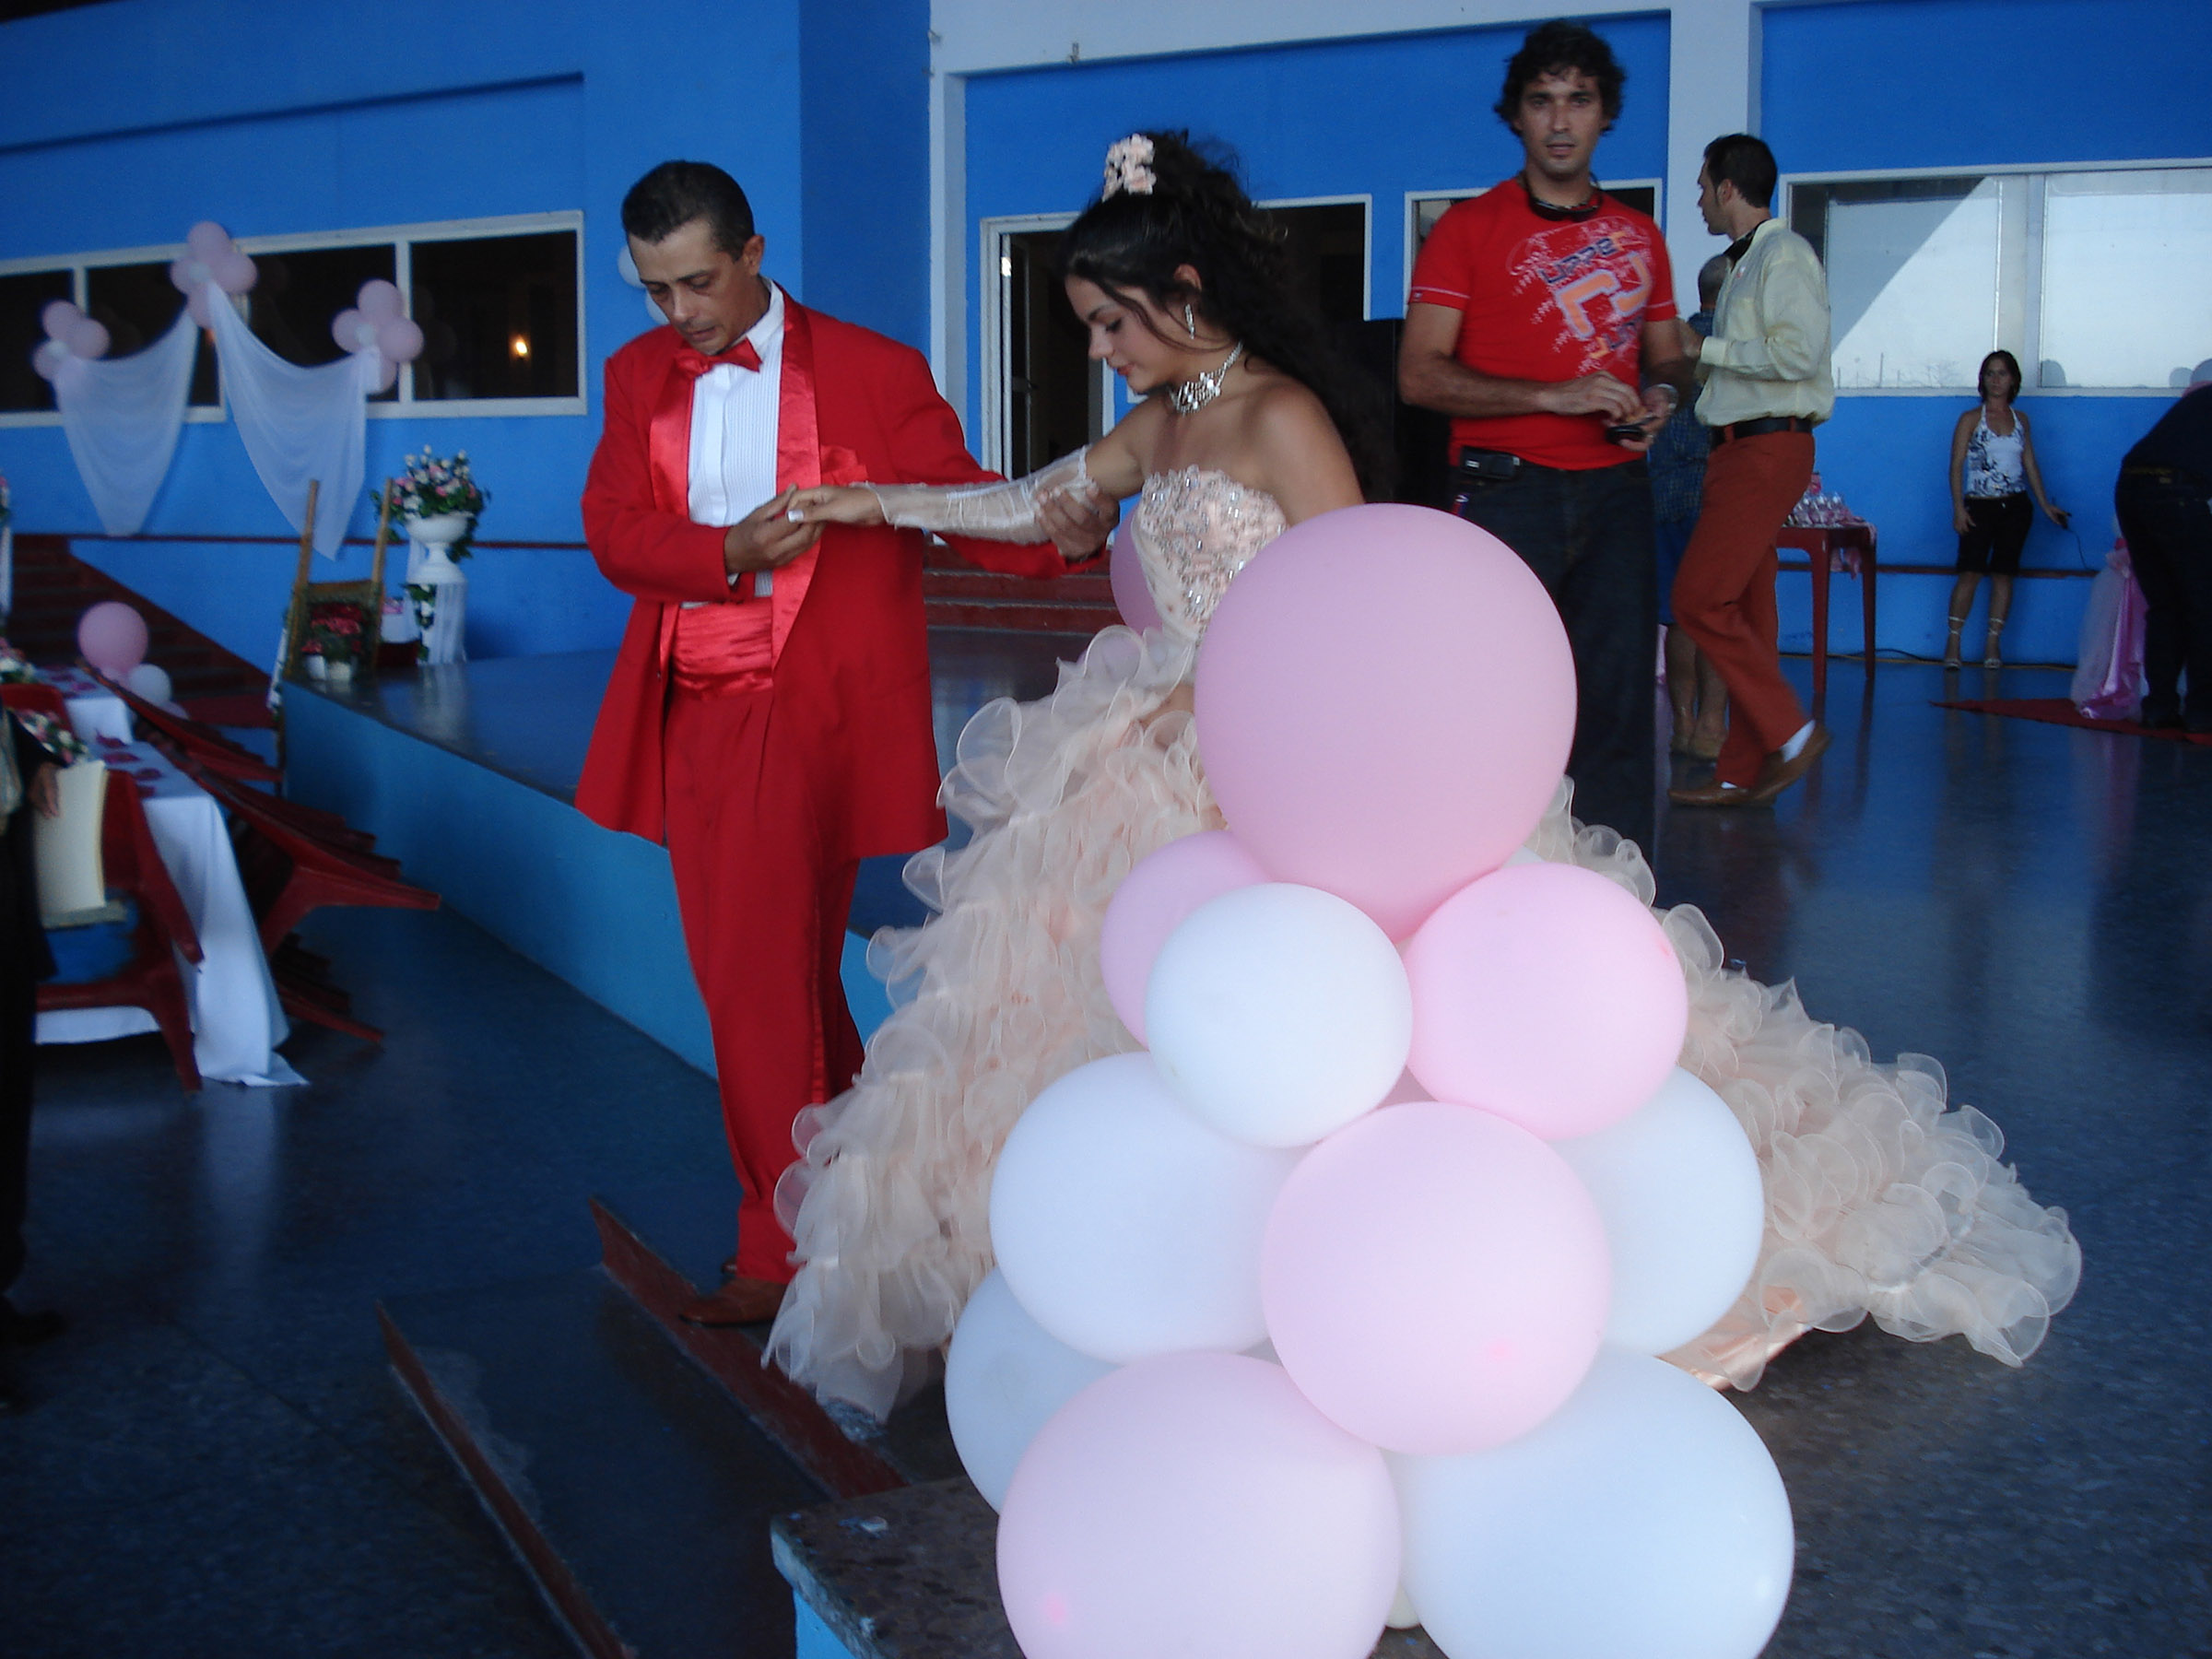 A young girl in a lavish light pink dress is led to the dance floor by a man in a red suit.